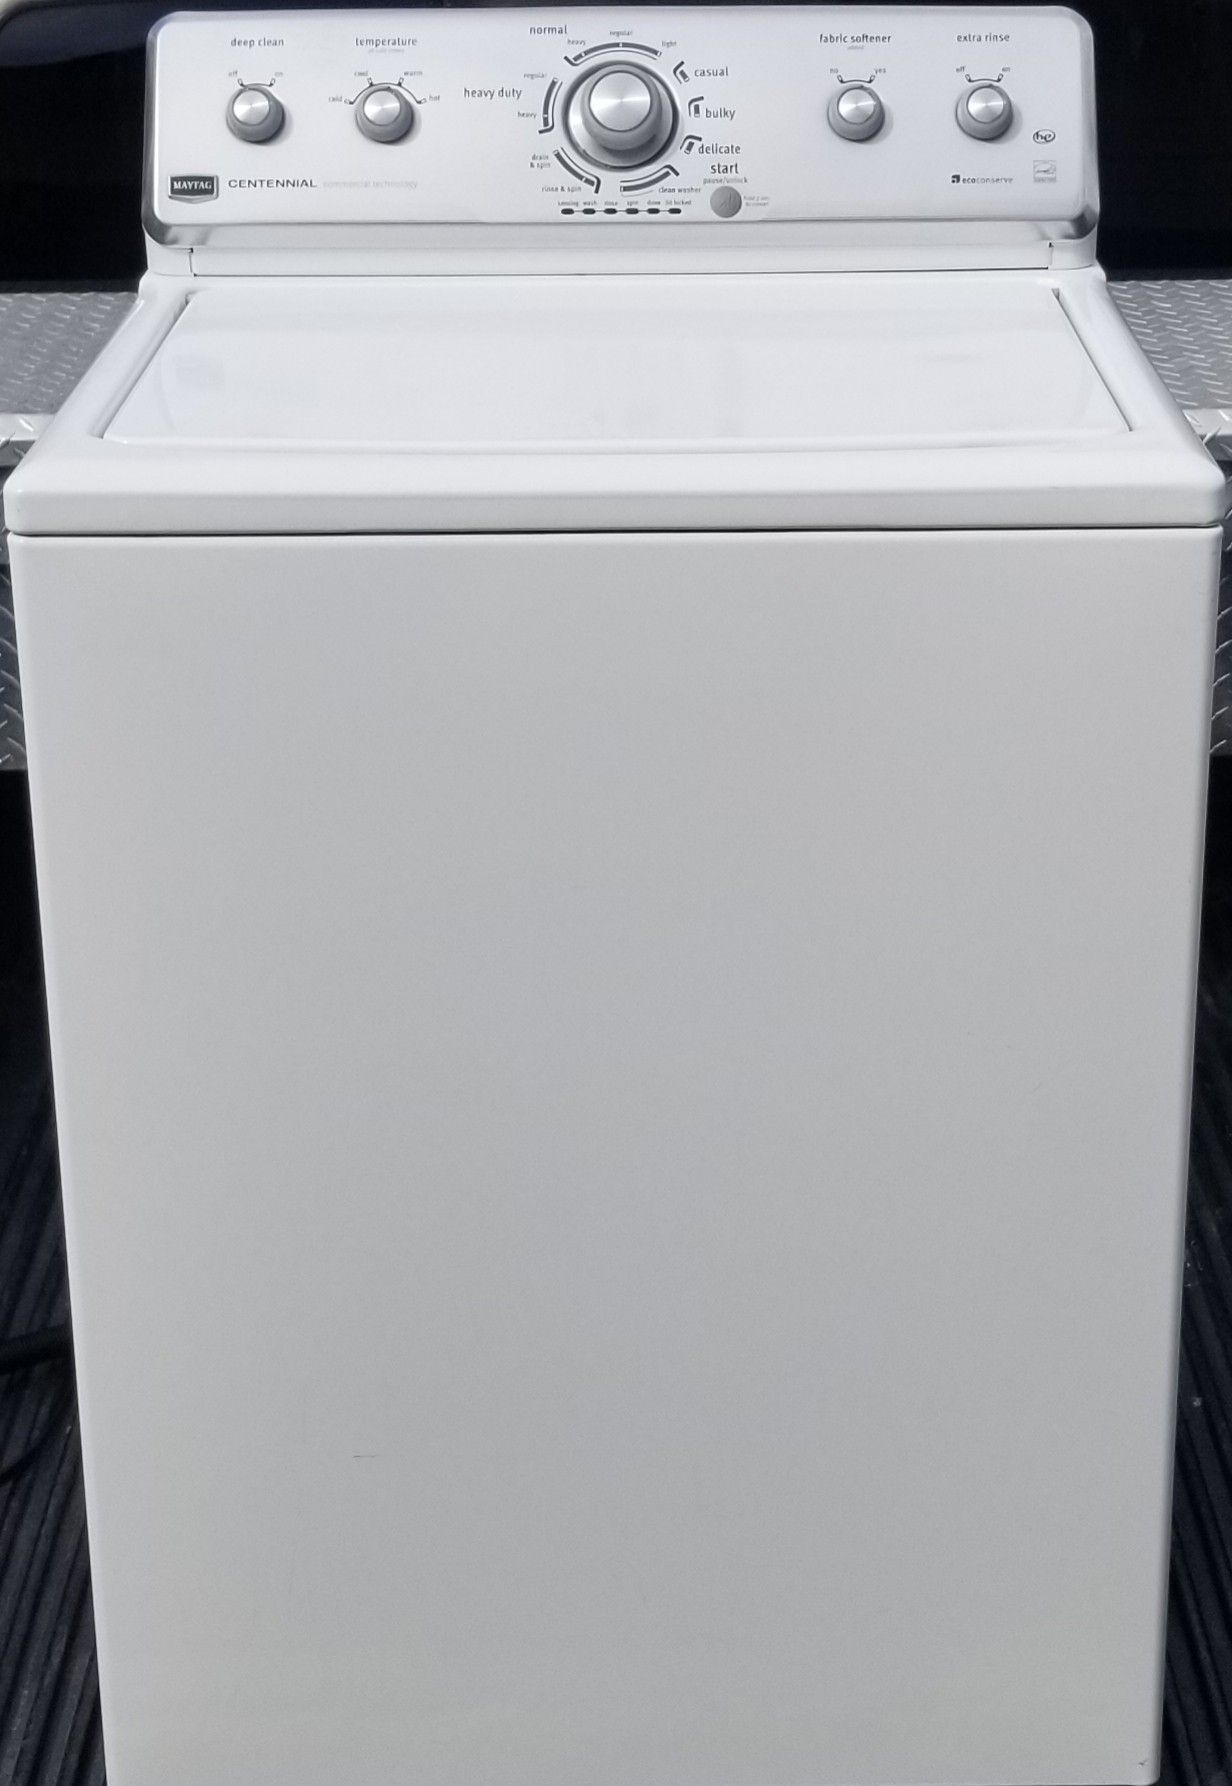 Maytag Centennial Series 27 Inch Top-Load Washer with 3.6 cu. ft. Capacity, 11 Cycles, High-Efficiency, Deep Clean Option, Energy Star Qualified